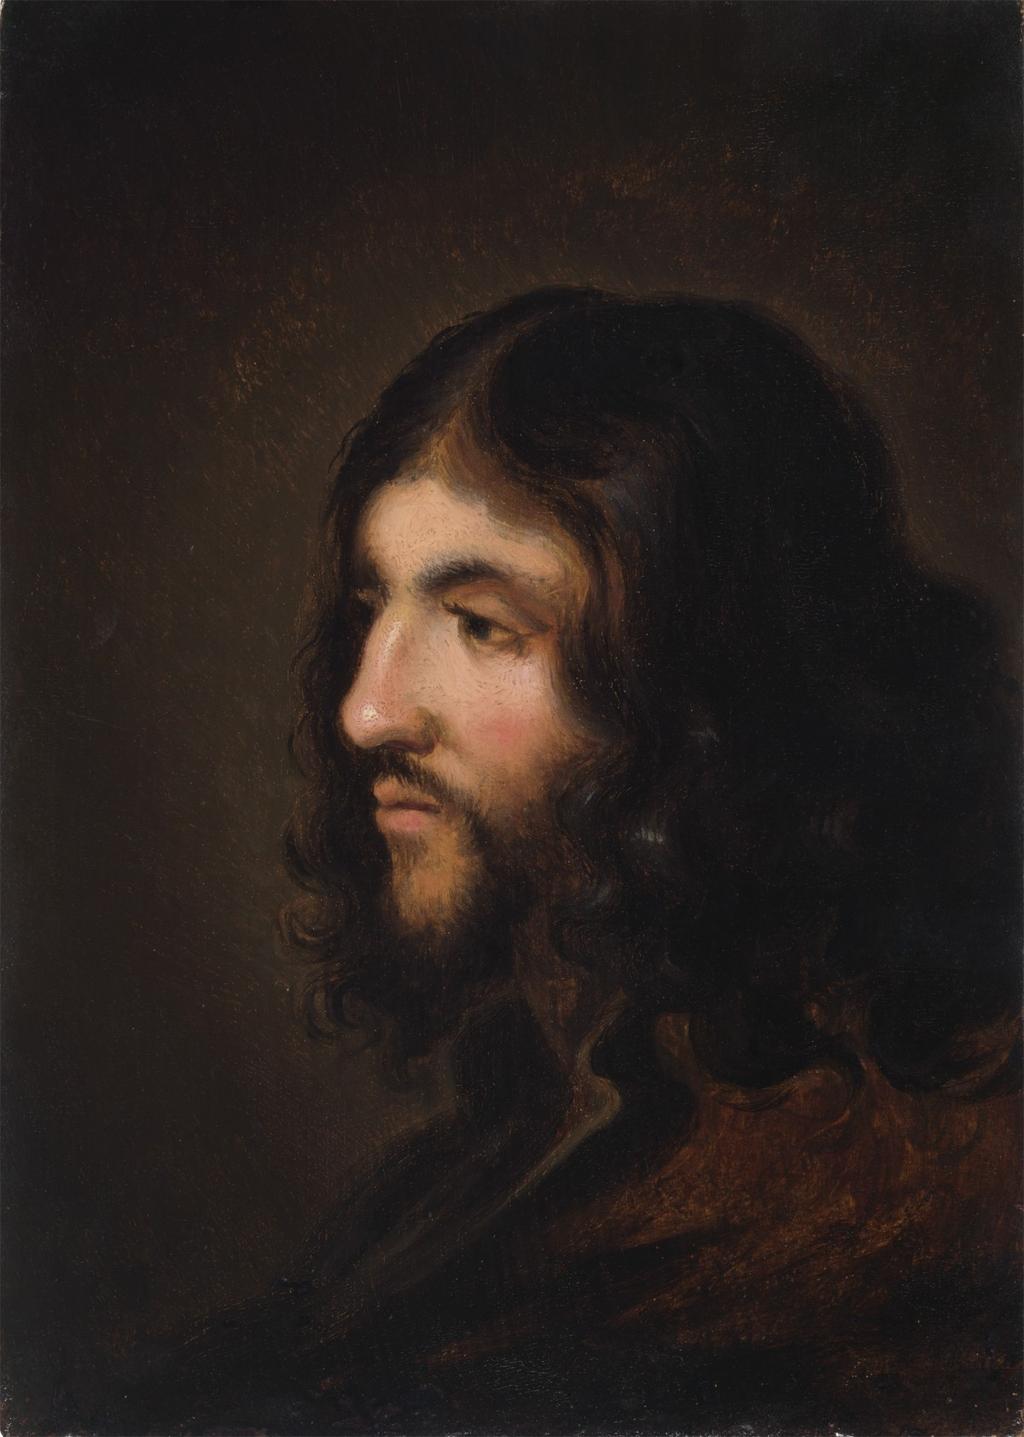 Portrait of a Man in Profile (Previously Portrait of a Jew in